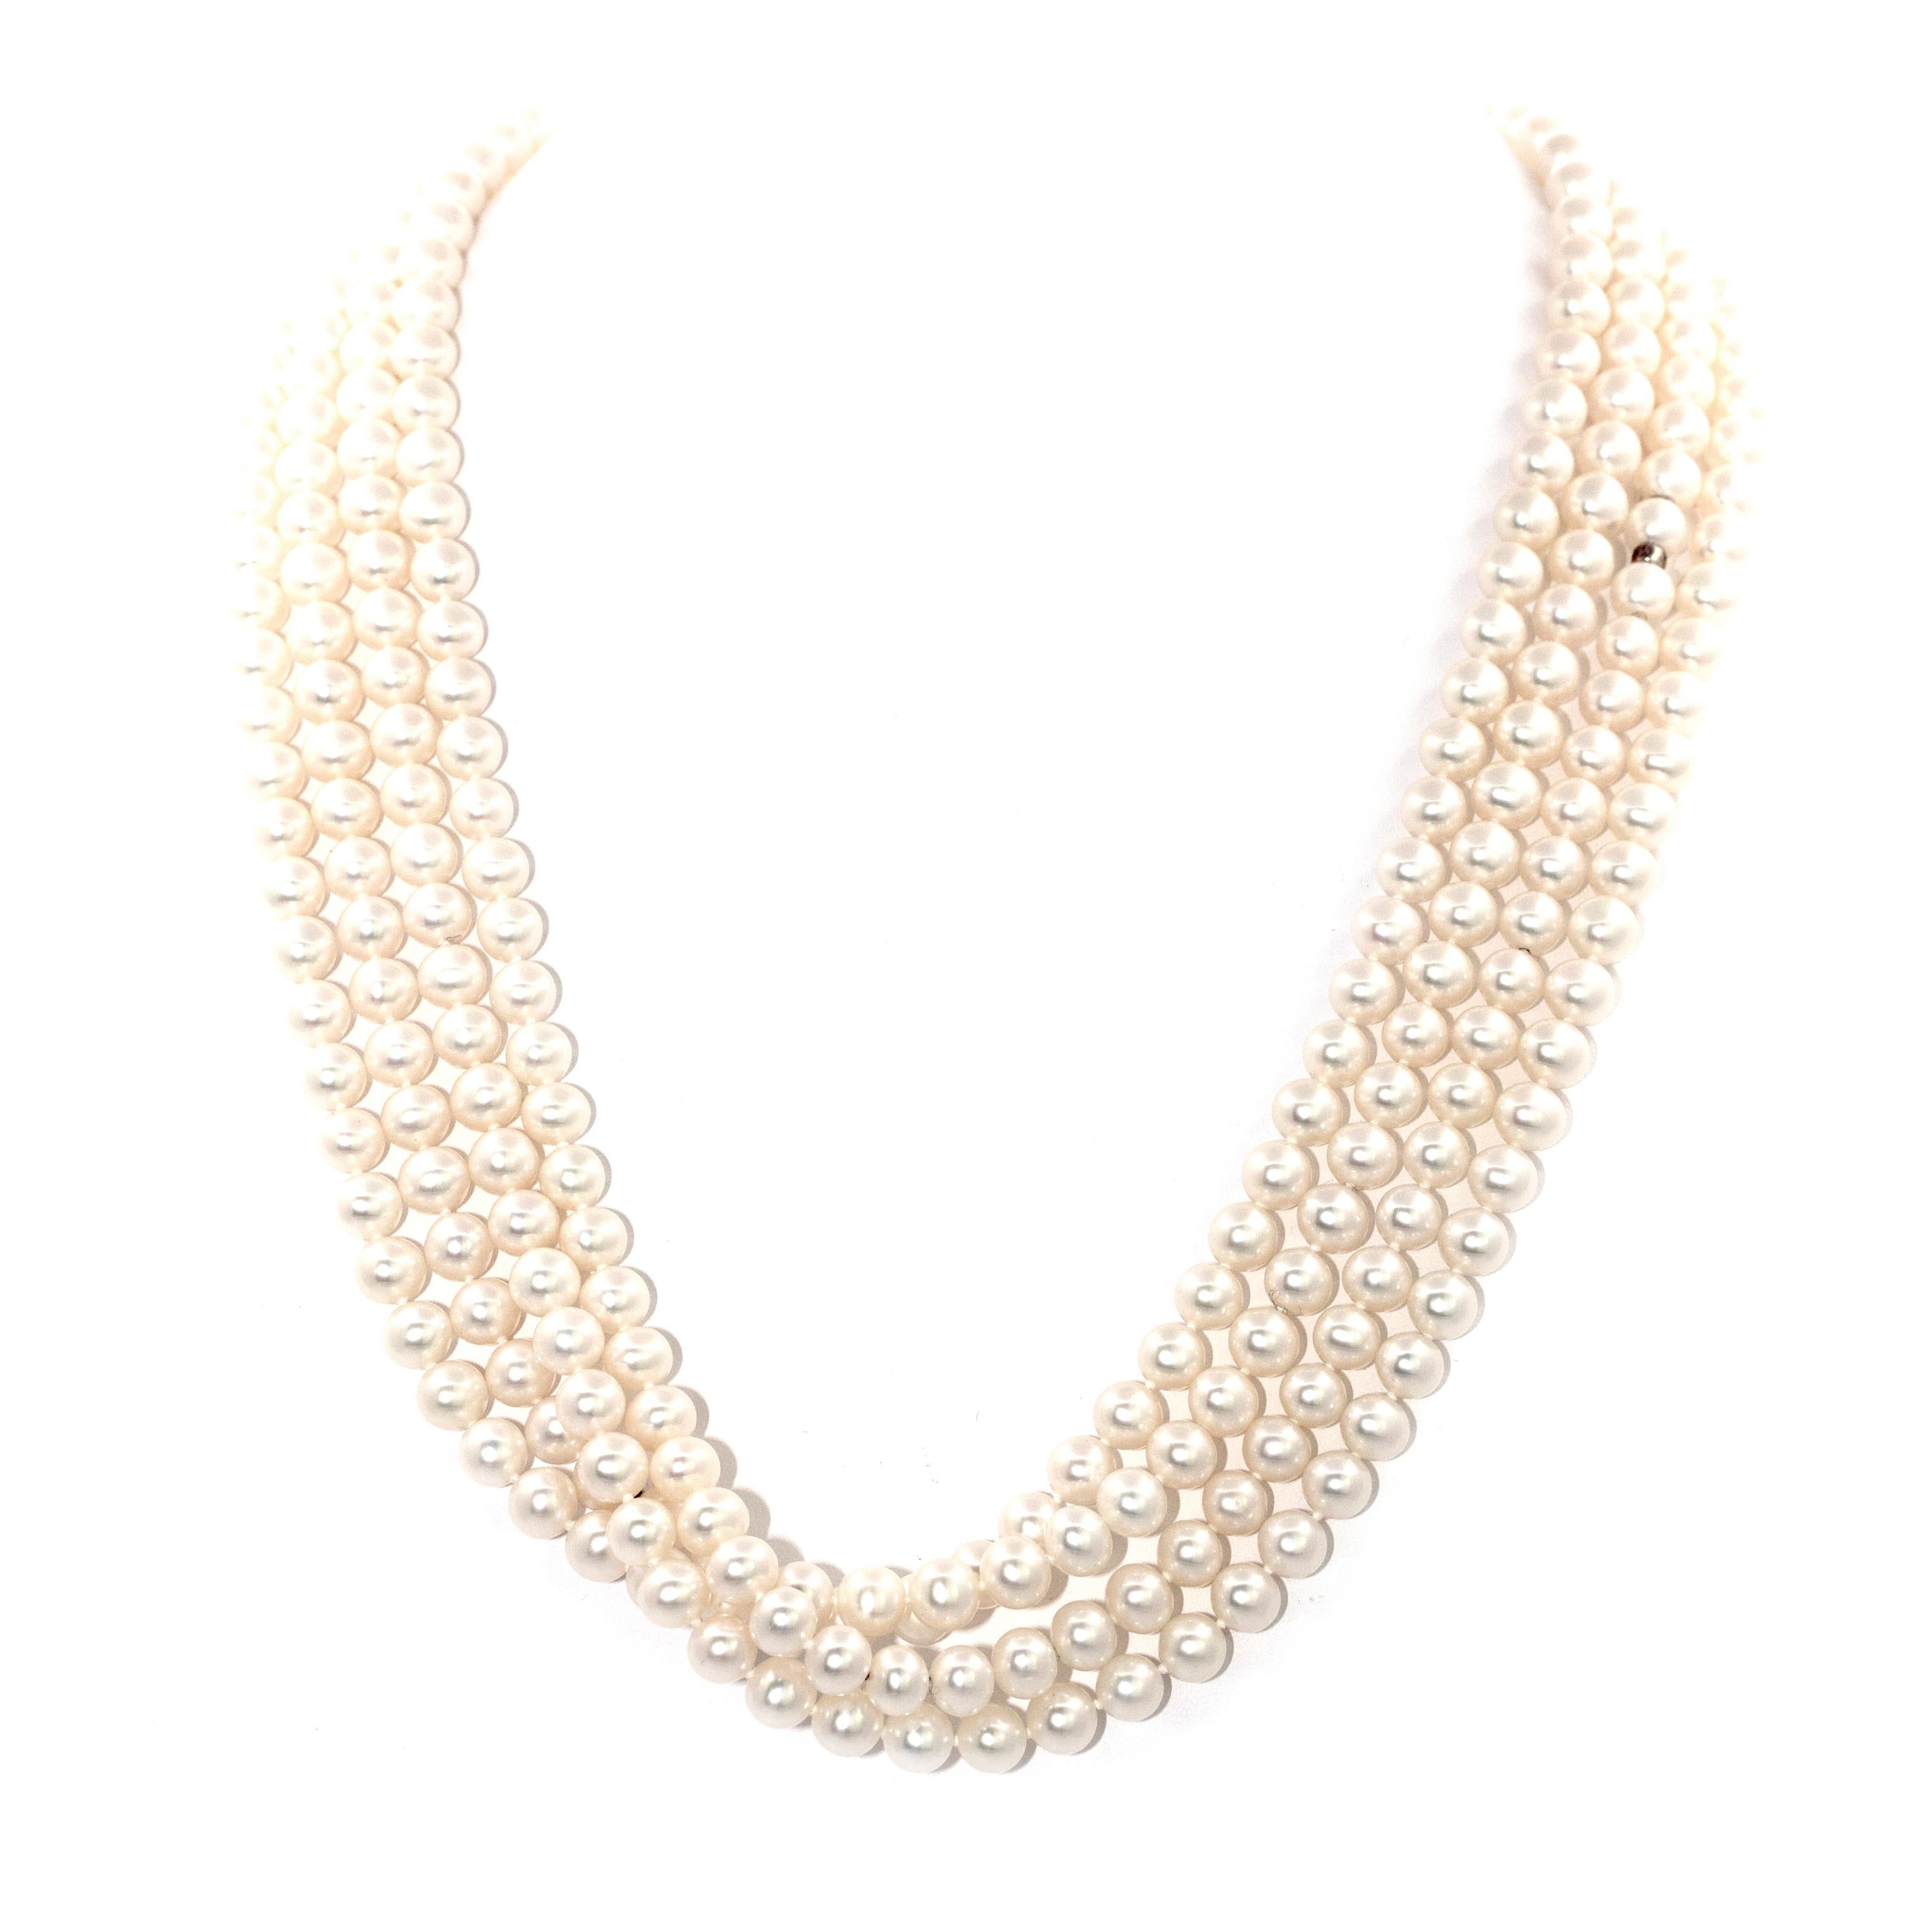 This lovely Ziegfeld Collection necklace of freshwater cultured pearls that’s 96 inches, with pearls in 7 to 8mm.  The Ziegfeld collection is inspired by the lavish elegance of the 1920s Jazz age.
Includes Tiffany & Co. Necklace box. 

